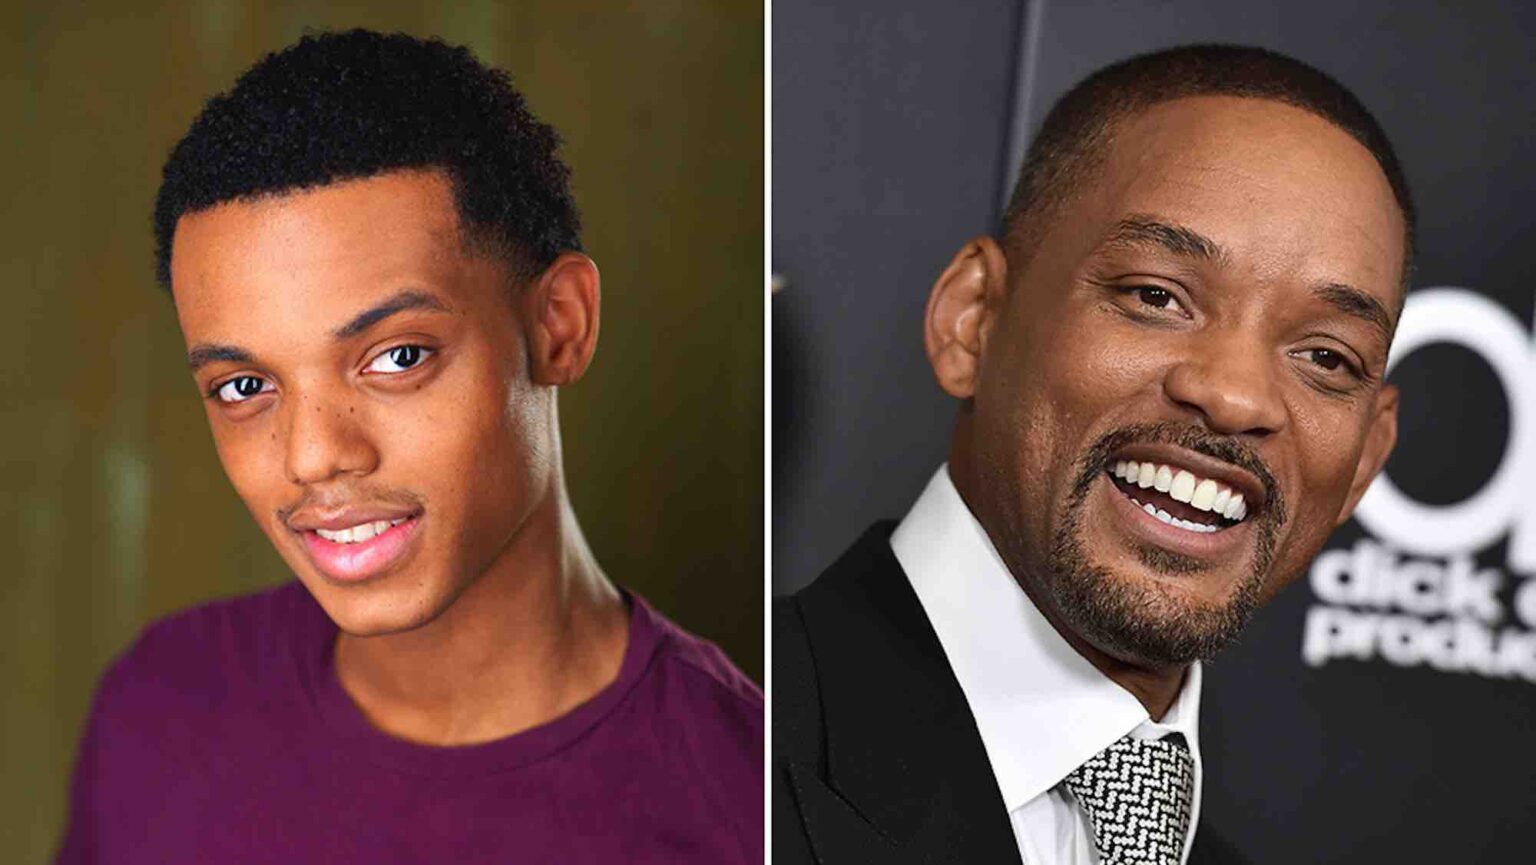 Meet the new Fresh Prince of Bel-Air, son! See as newcomer Jabari Banks score the role of Will Smith in dramatic 'Bel-Air' series.